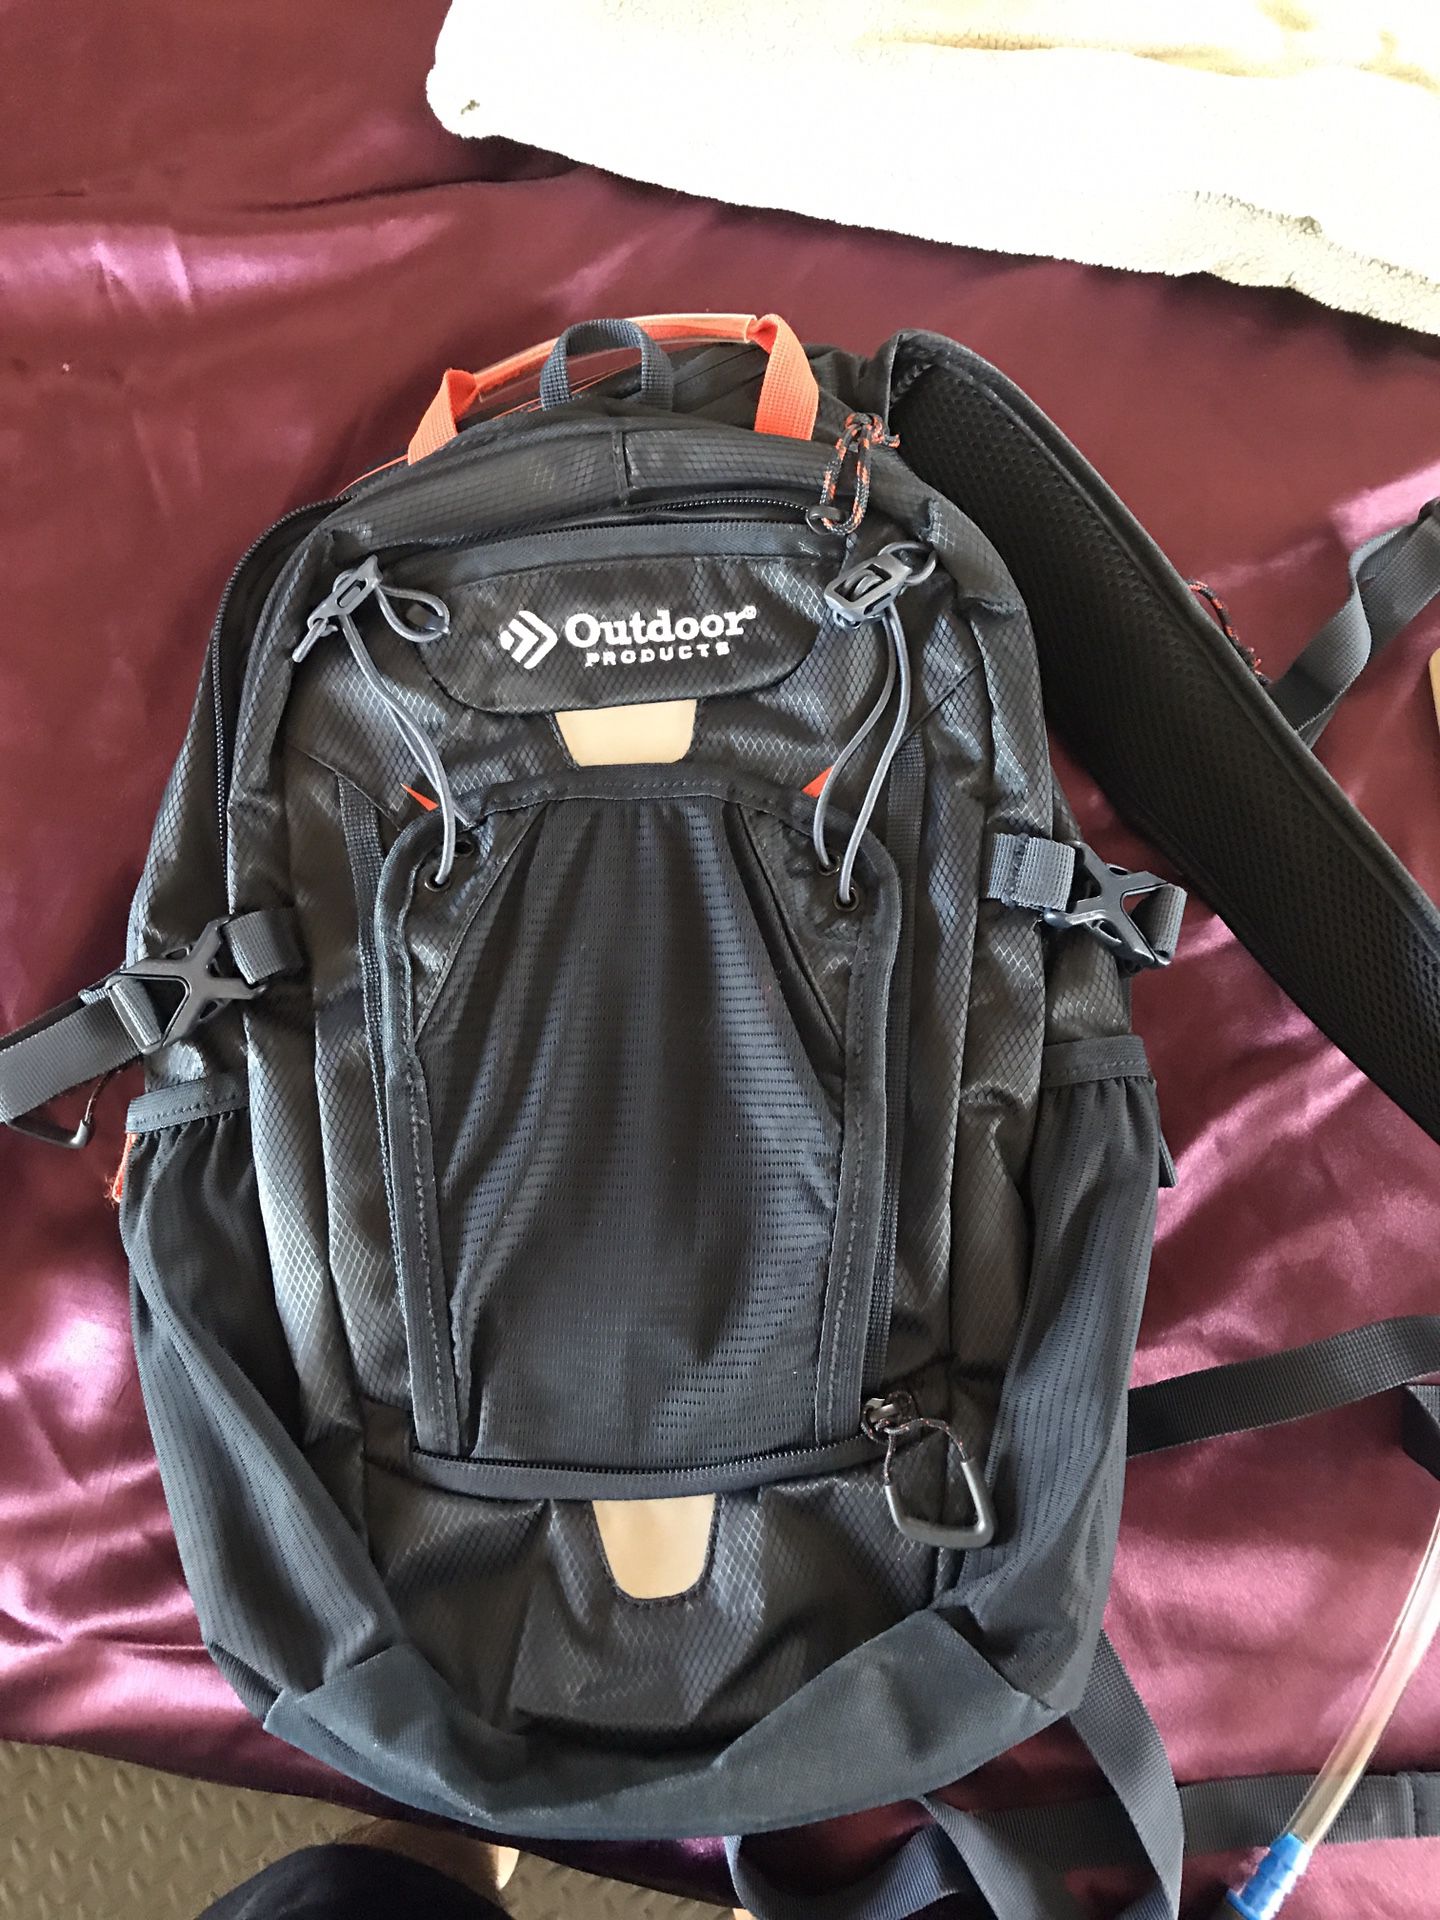 Outdoor Product hydration backpack